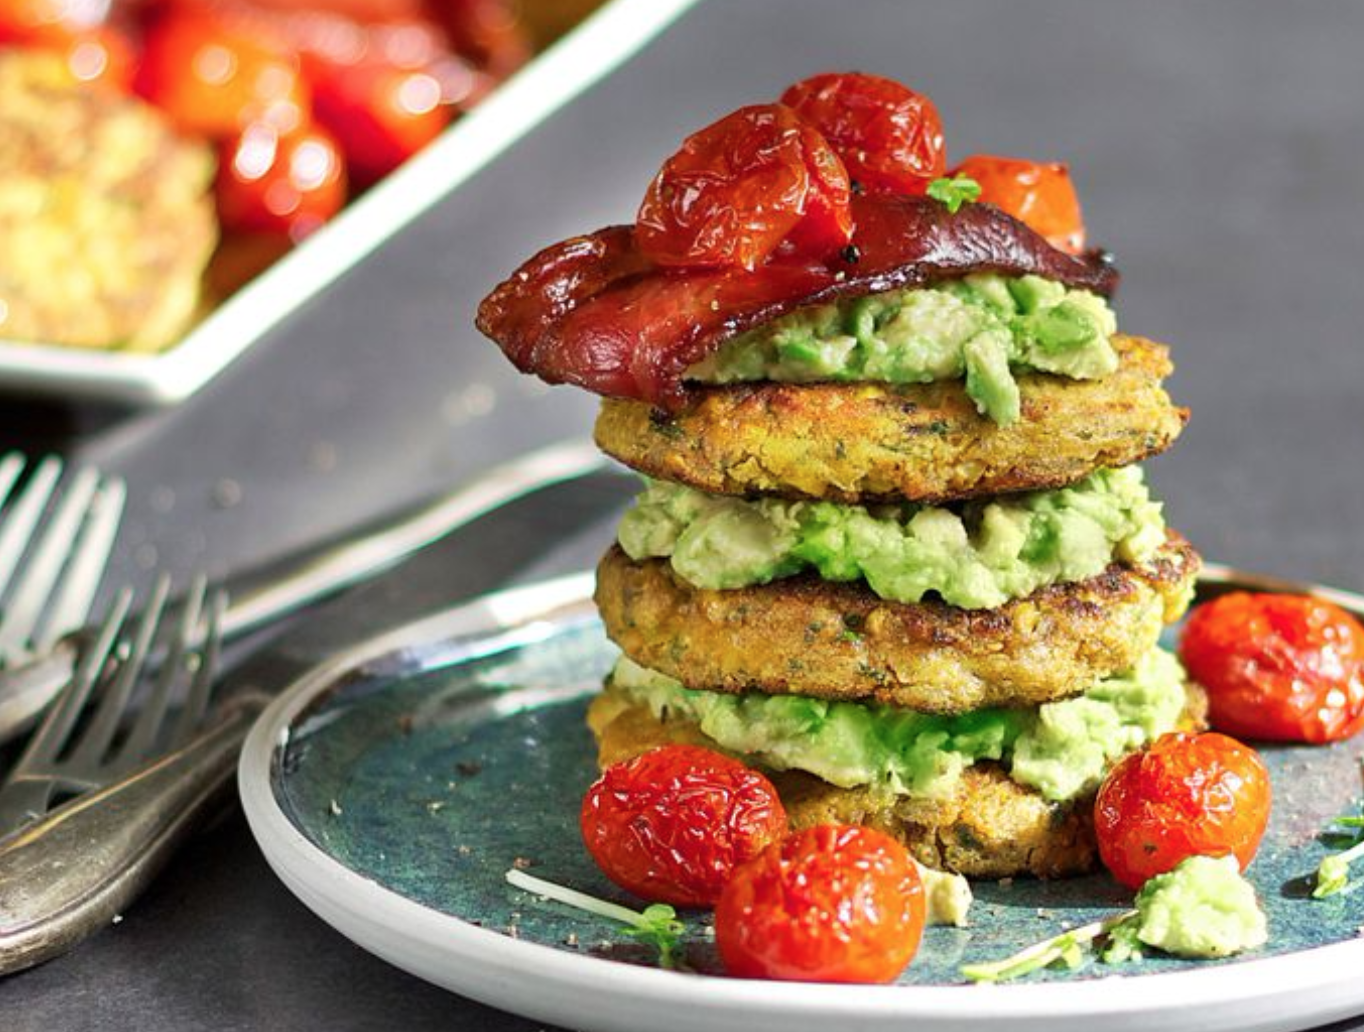 Breakfast Corn Fritters With Roast Cherry Tomatoes & Bacon